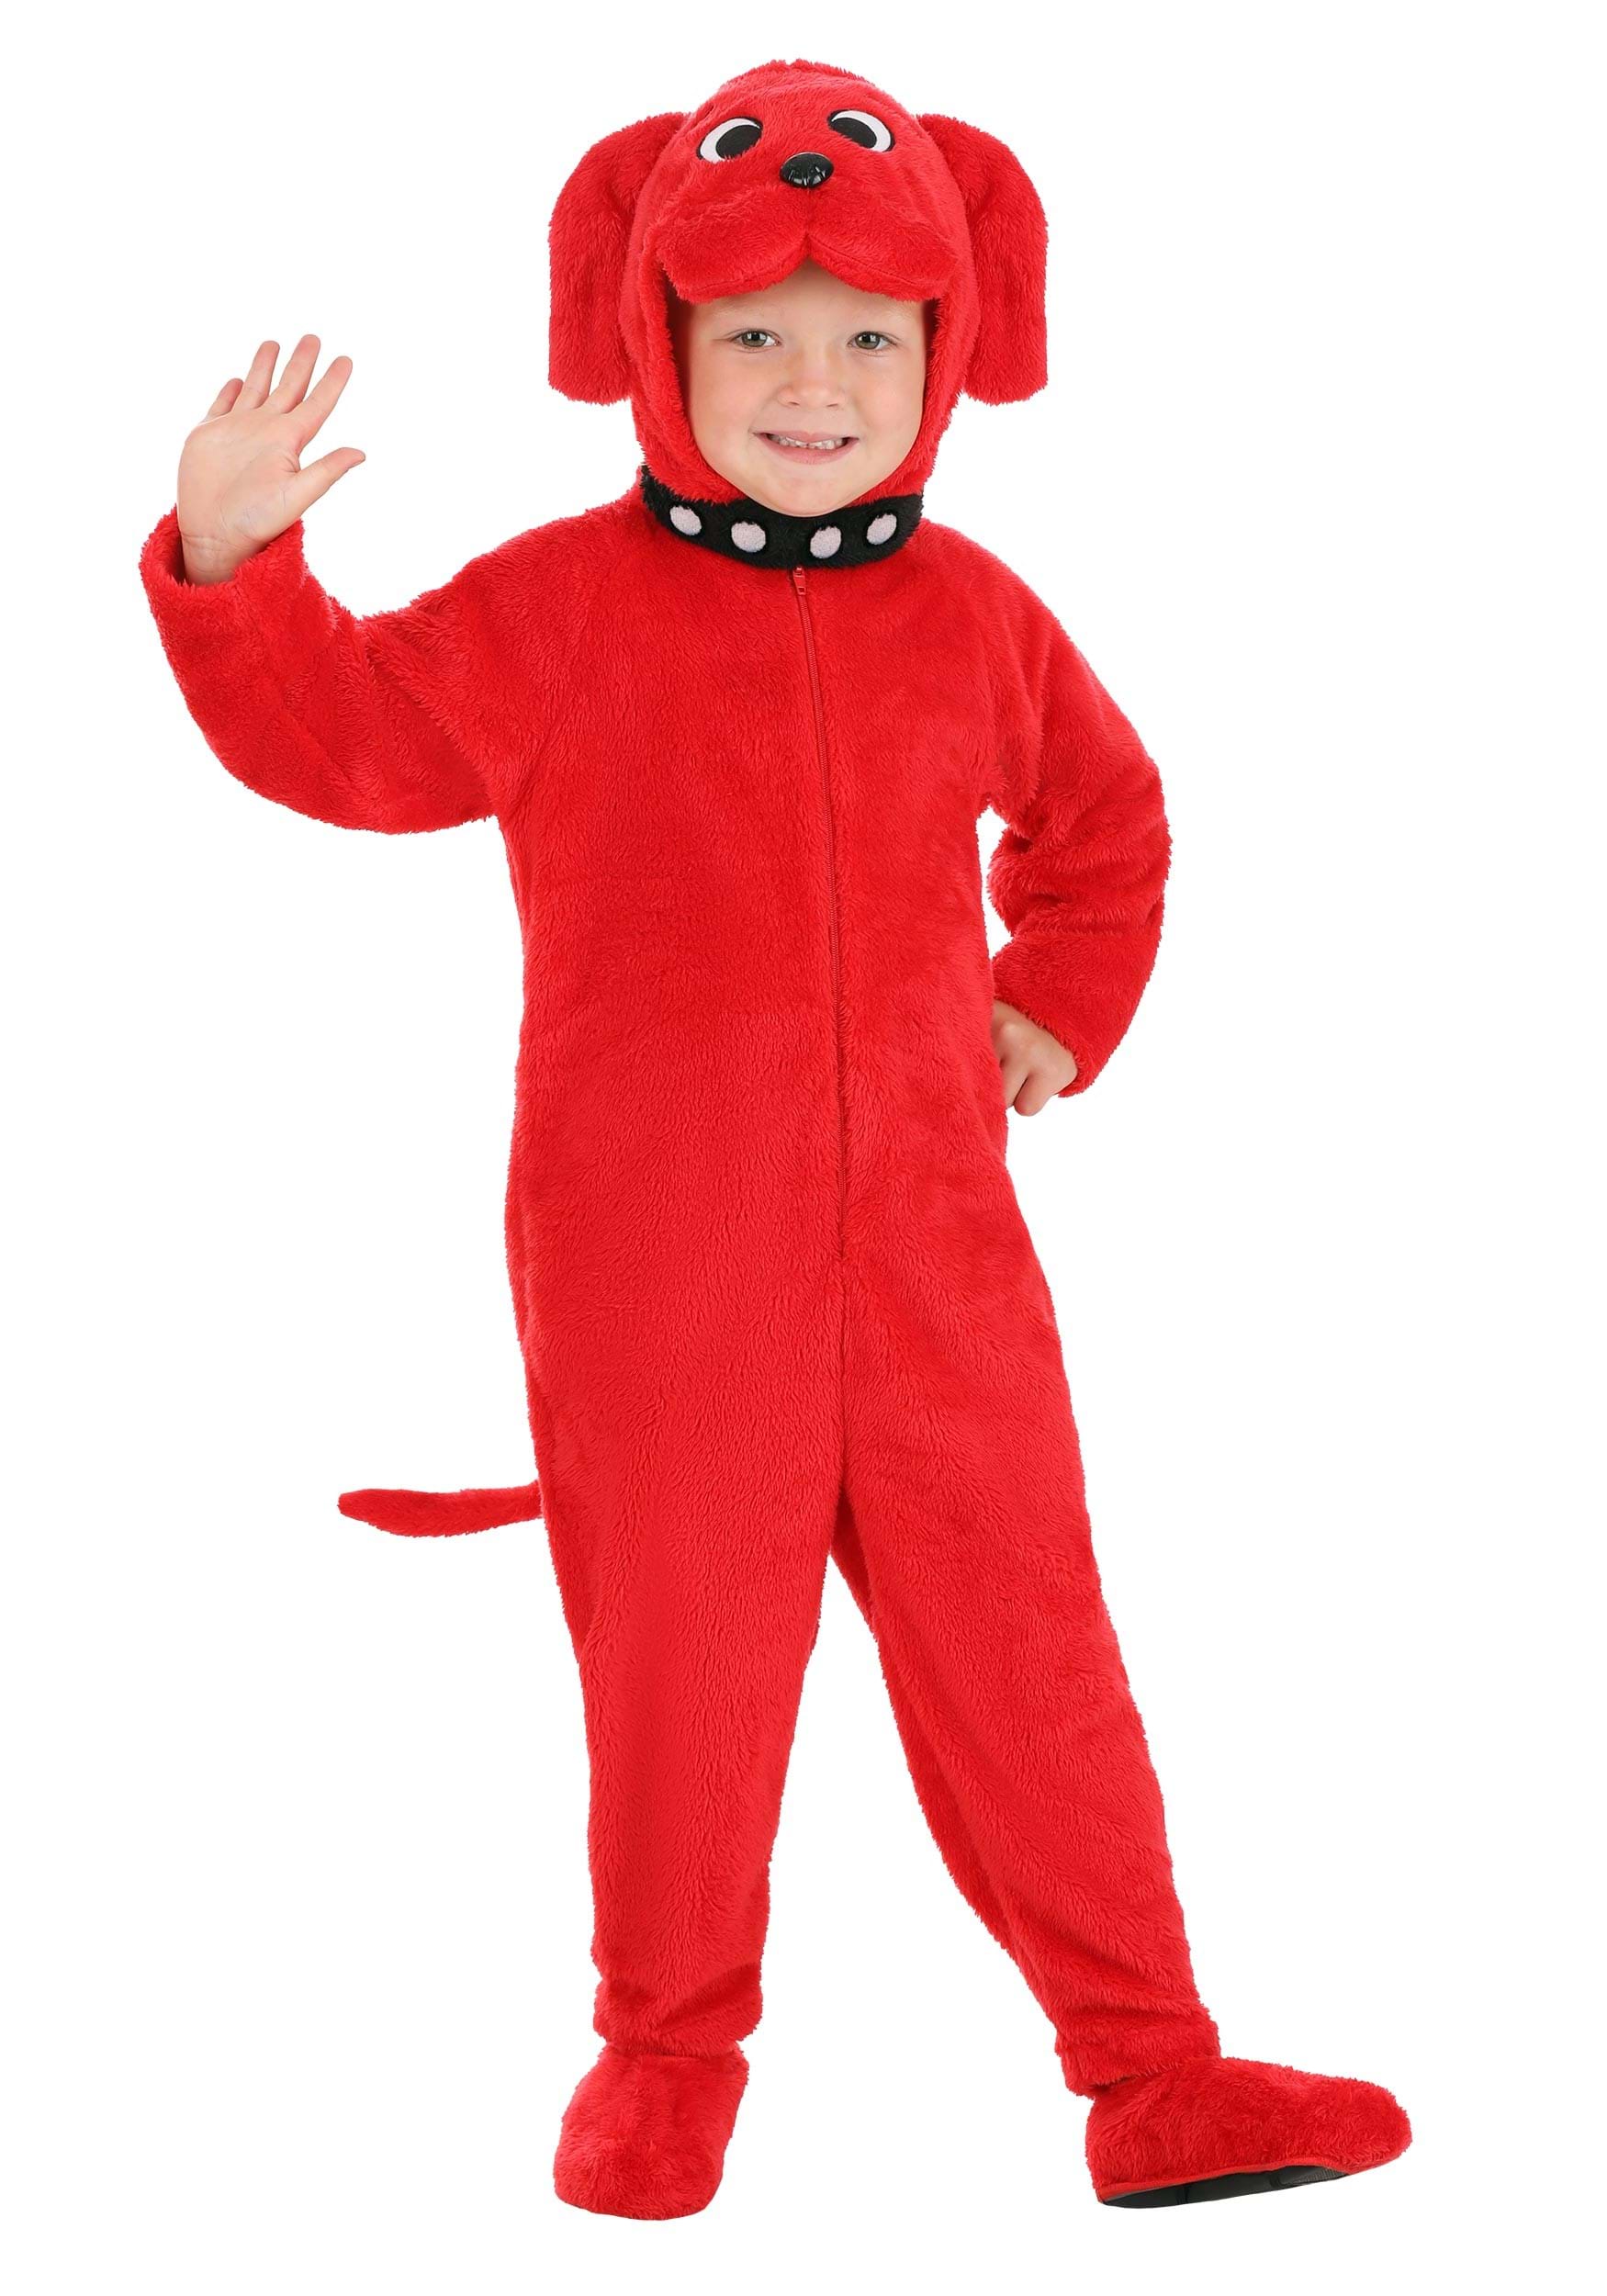 Photos - Fancy Dress Clifford FUN Costumes  the Big Red Dog Costume Toddler's Size Black/Red 